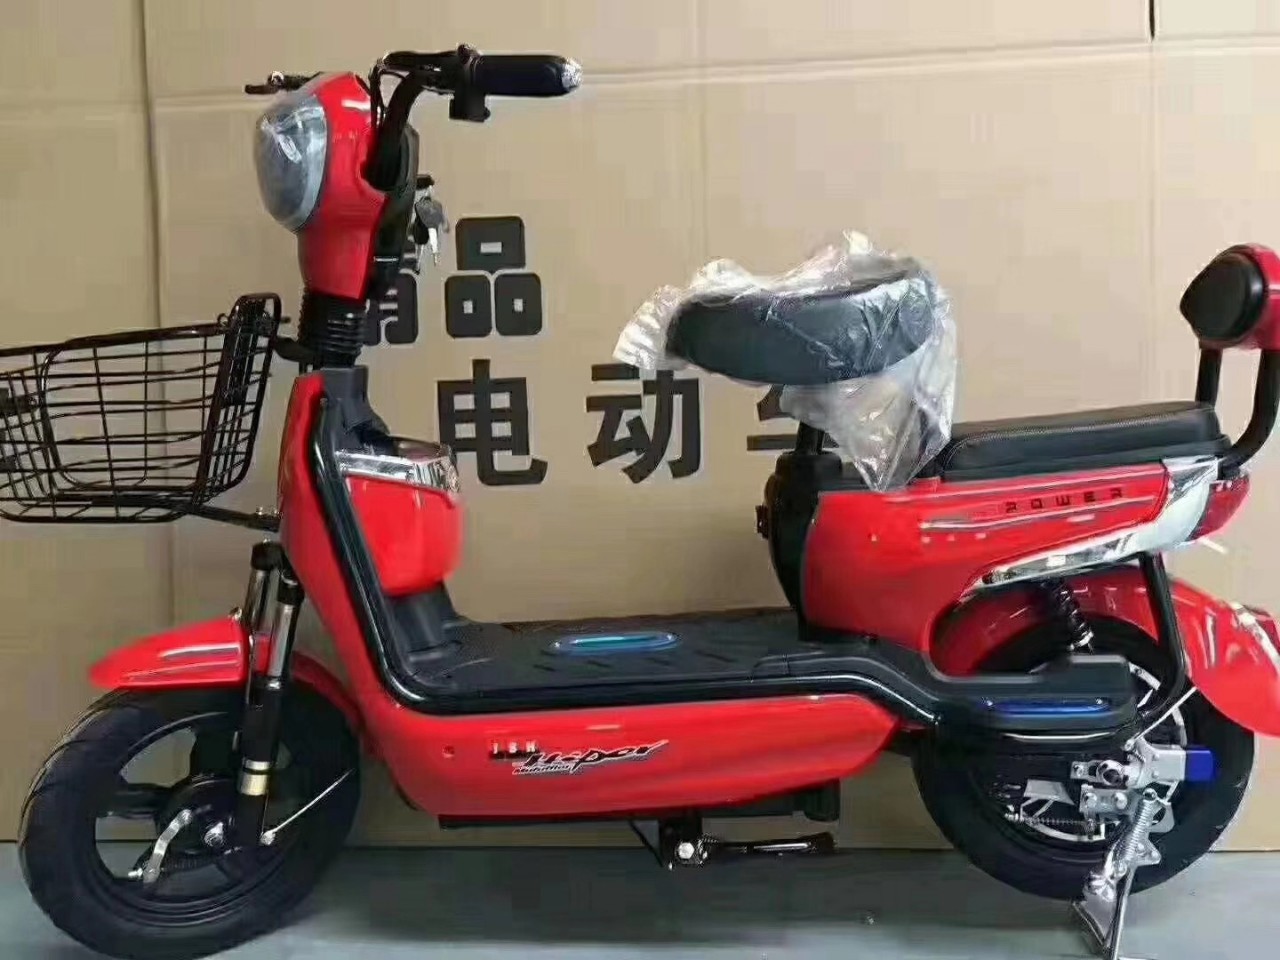 (Exclusive for Export) Battery Car New 48V Battery Adult Electric Bicycle Gift Electric Bicycle